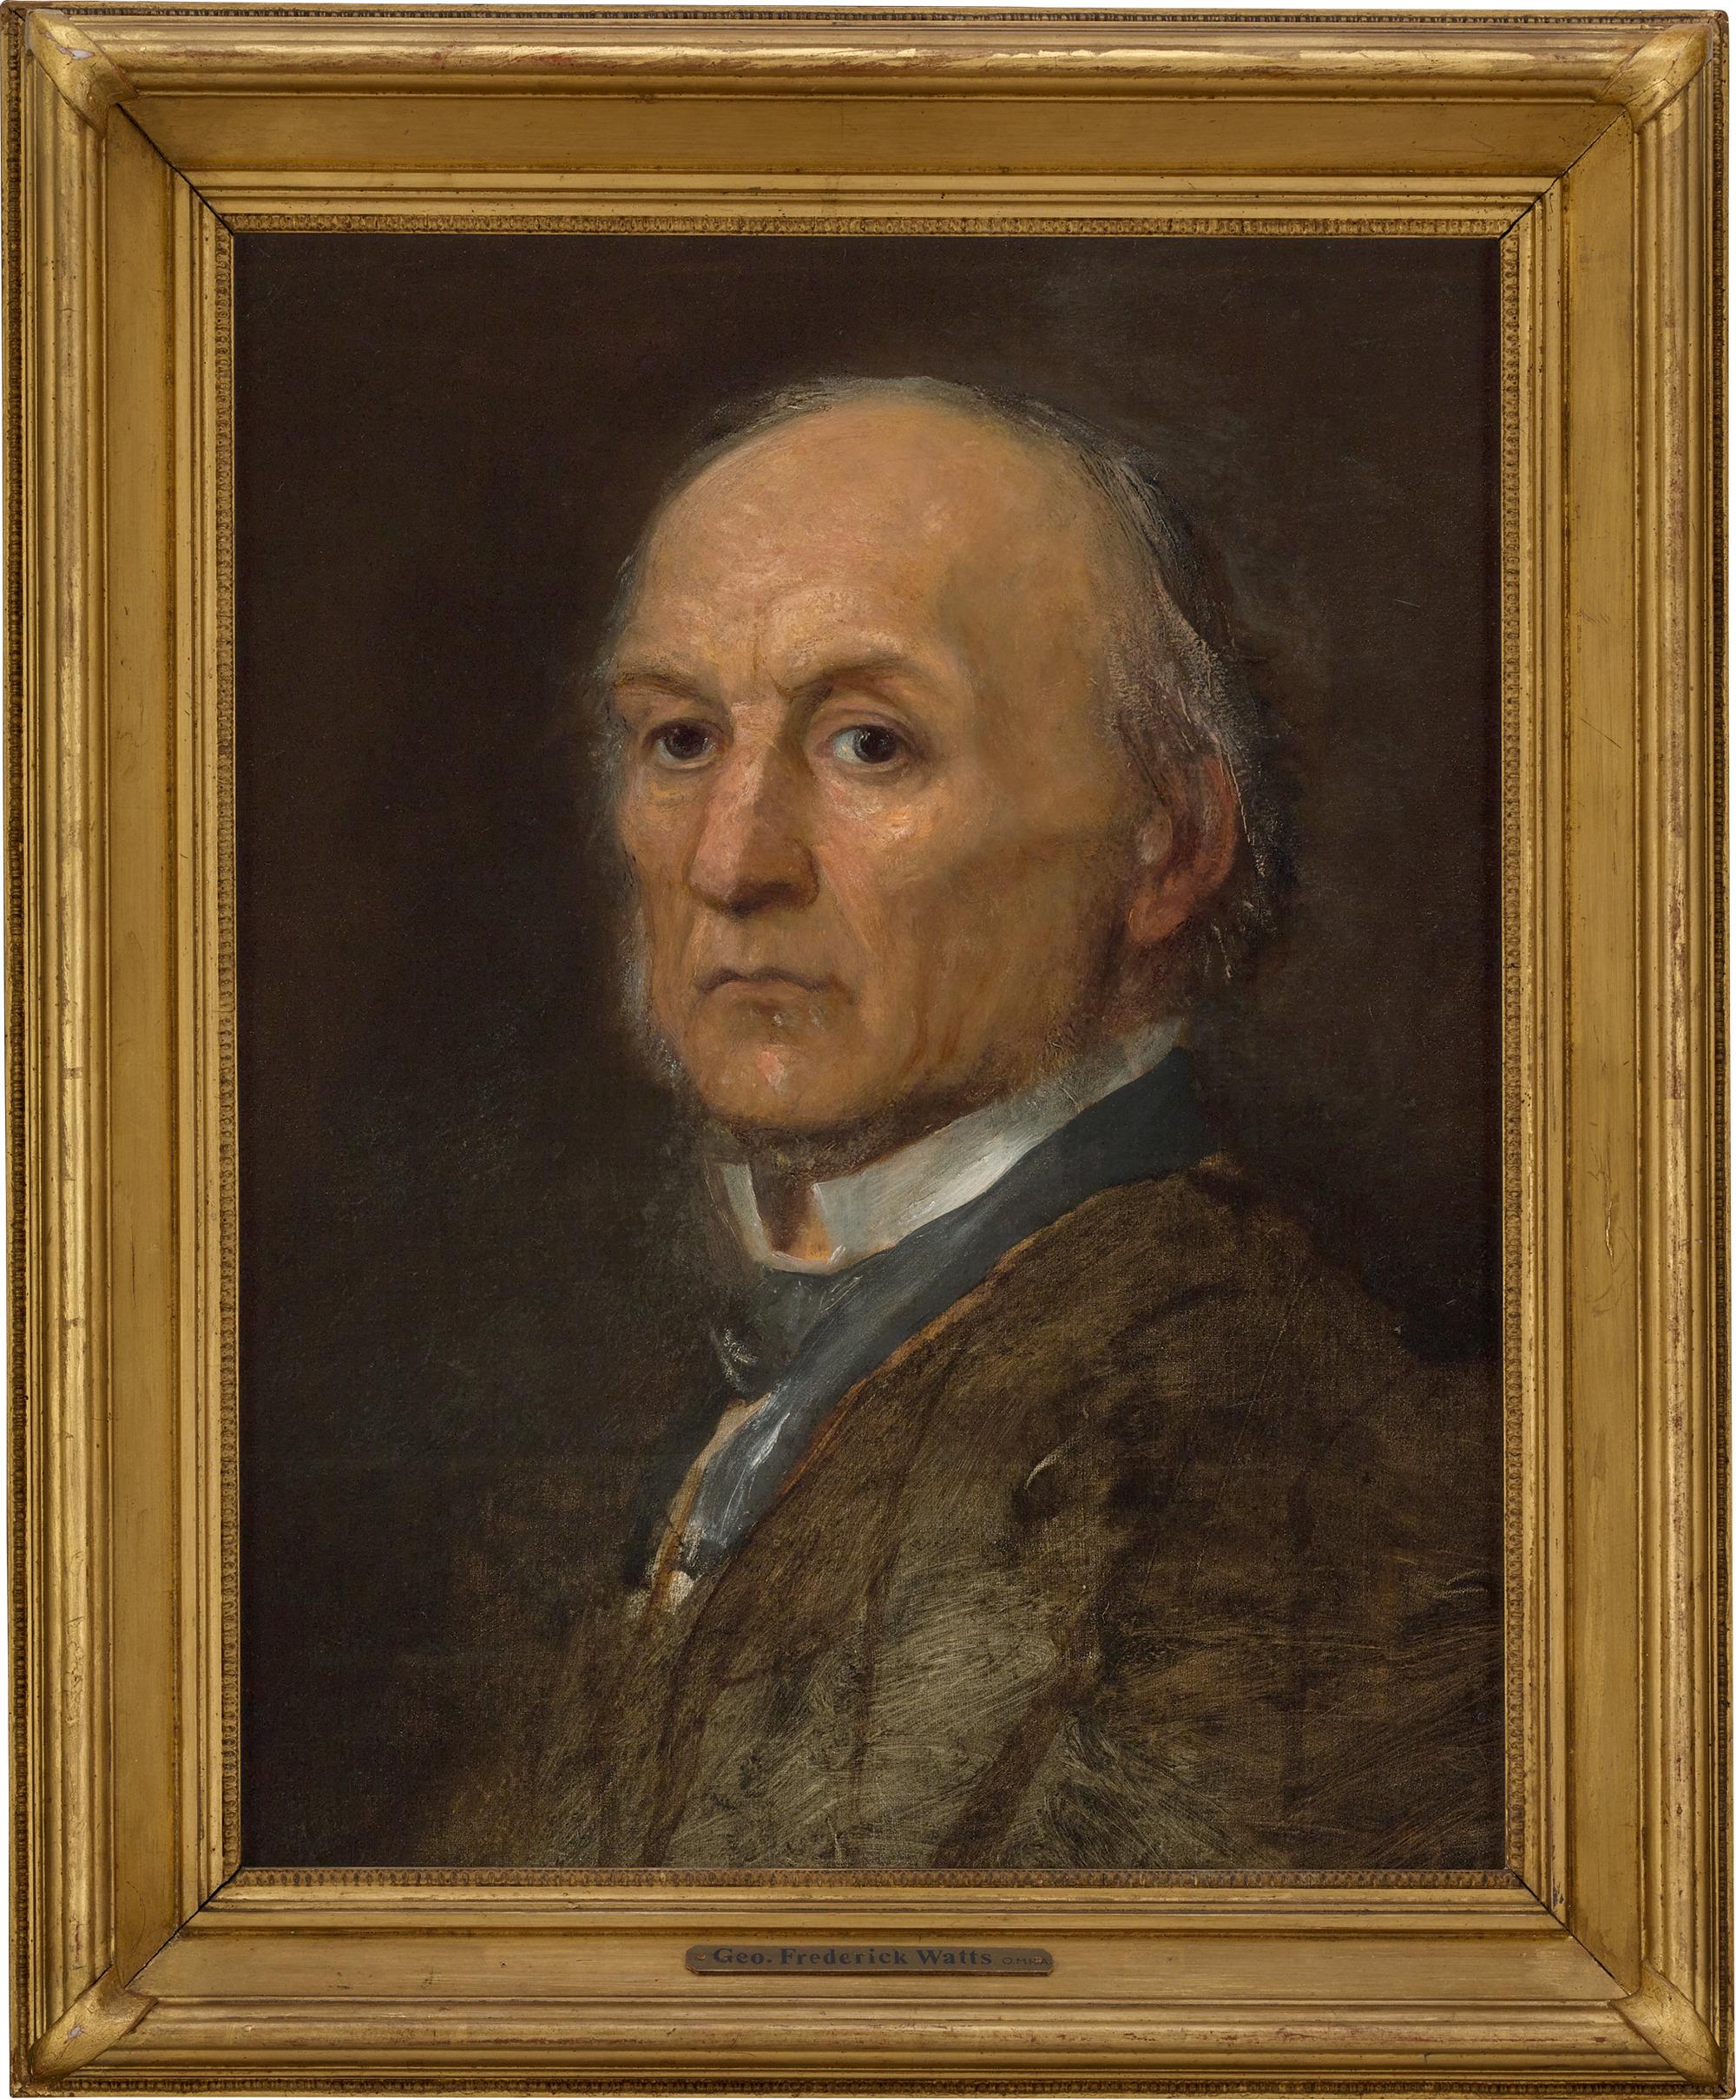 Portrait Of Prime Minister William Ewart Gladstone By George Frederic Watts - Painting by George Frederic Watts OM RA